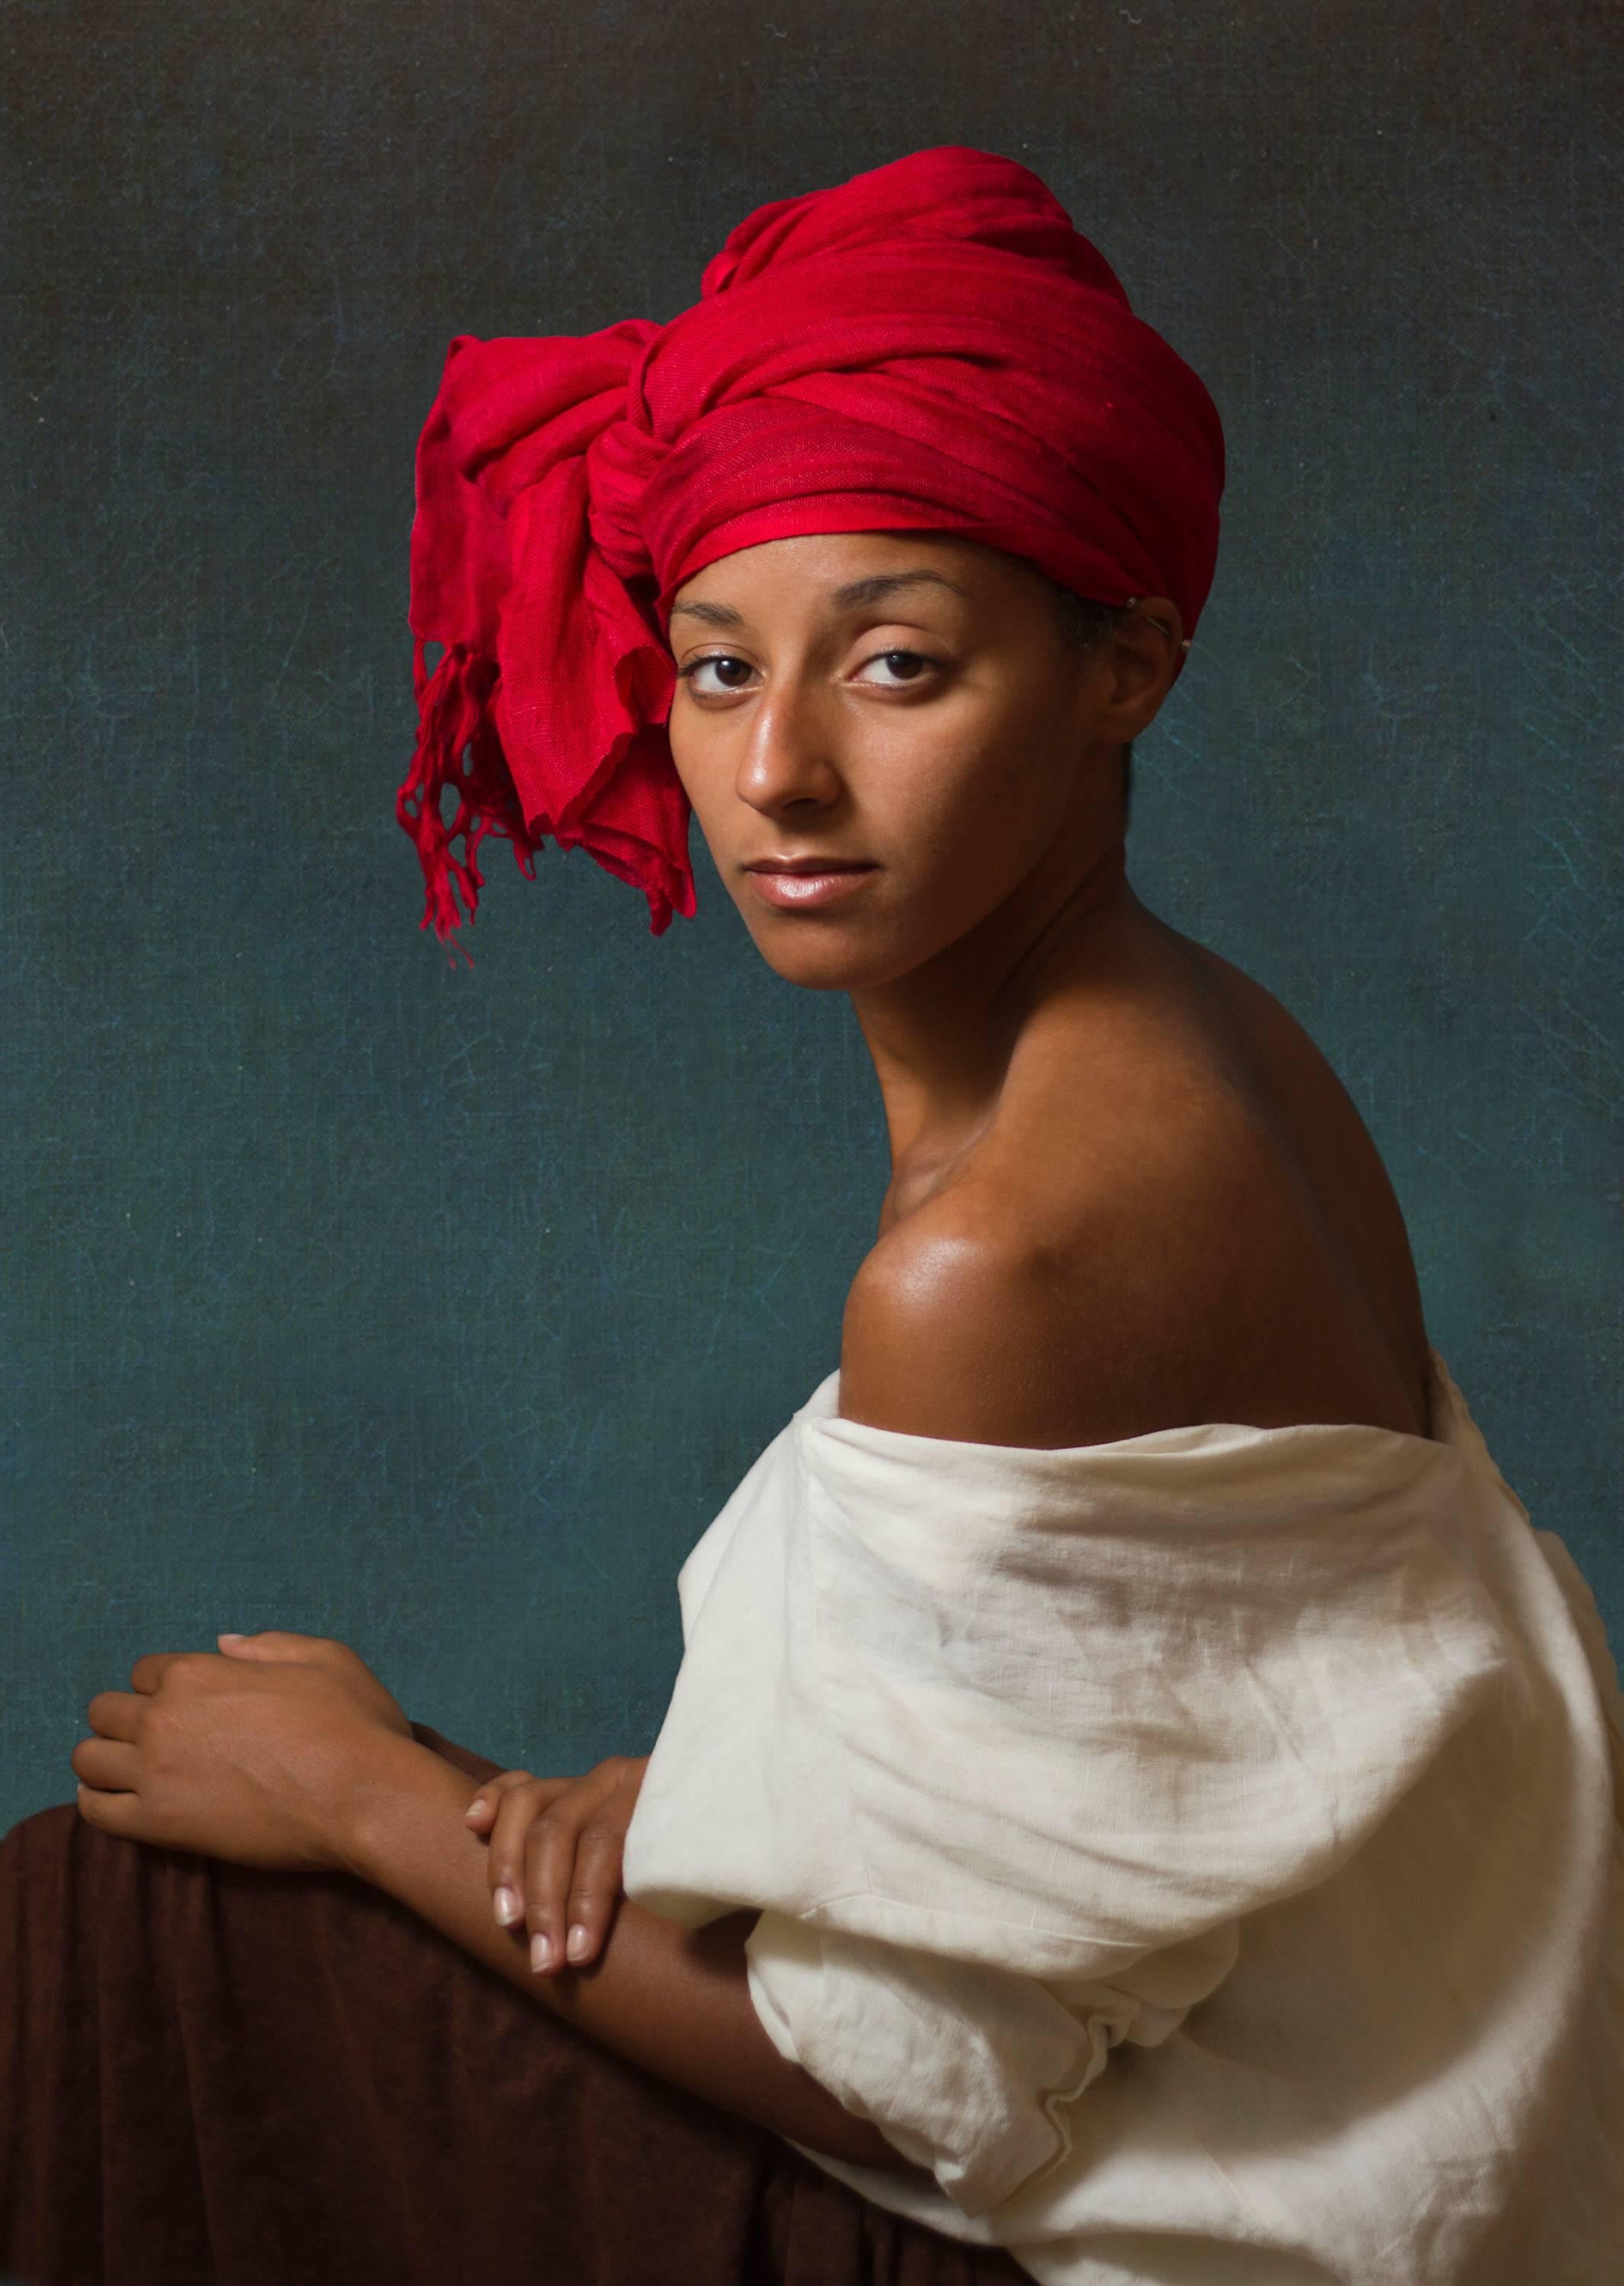 E2 - Kleinveld & Julien Figurative Photograph - Ode to Aman's Creole with a Red Headdress